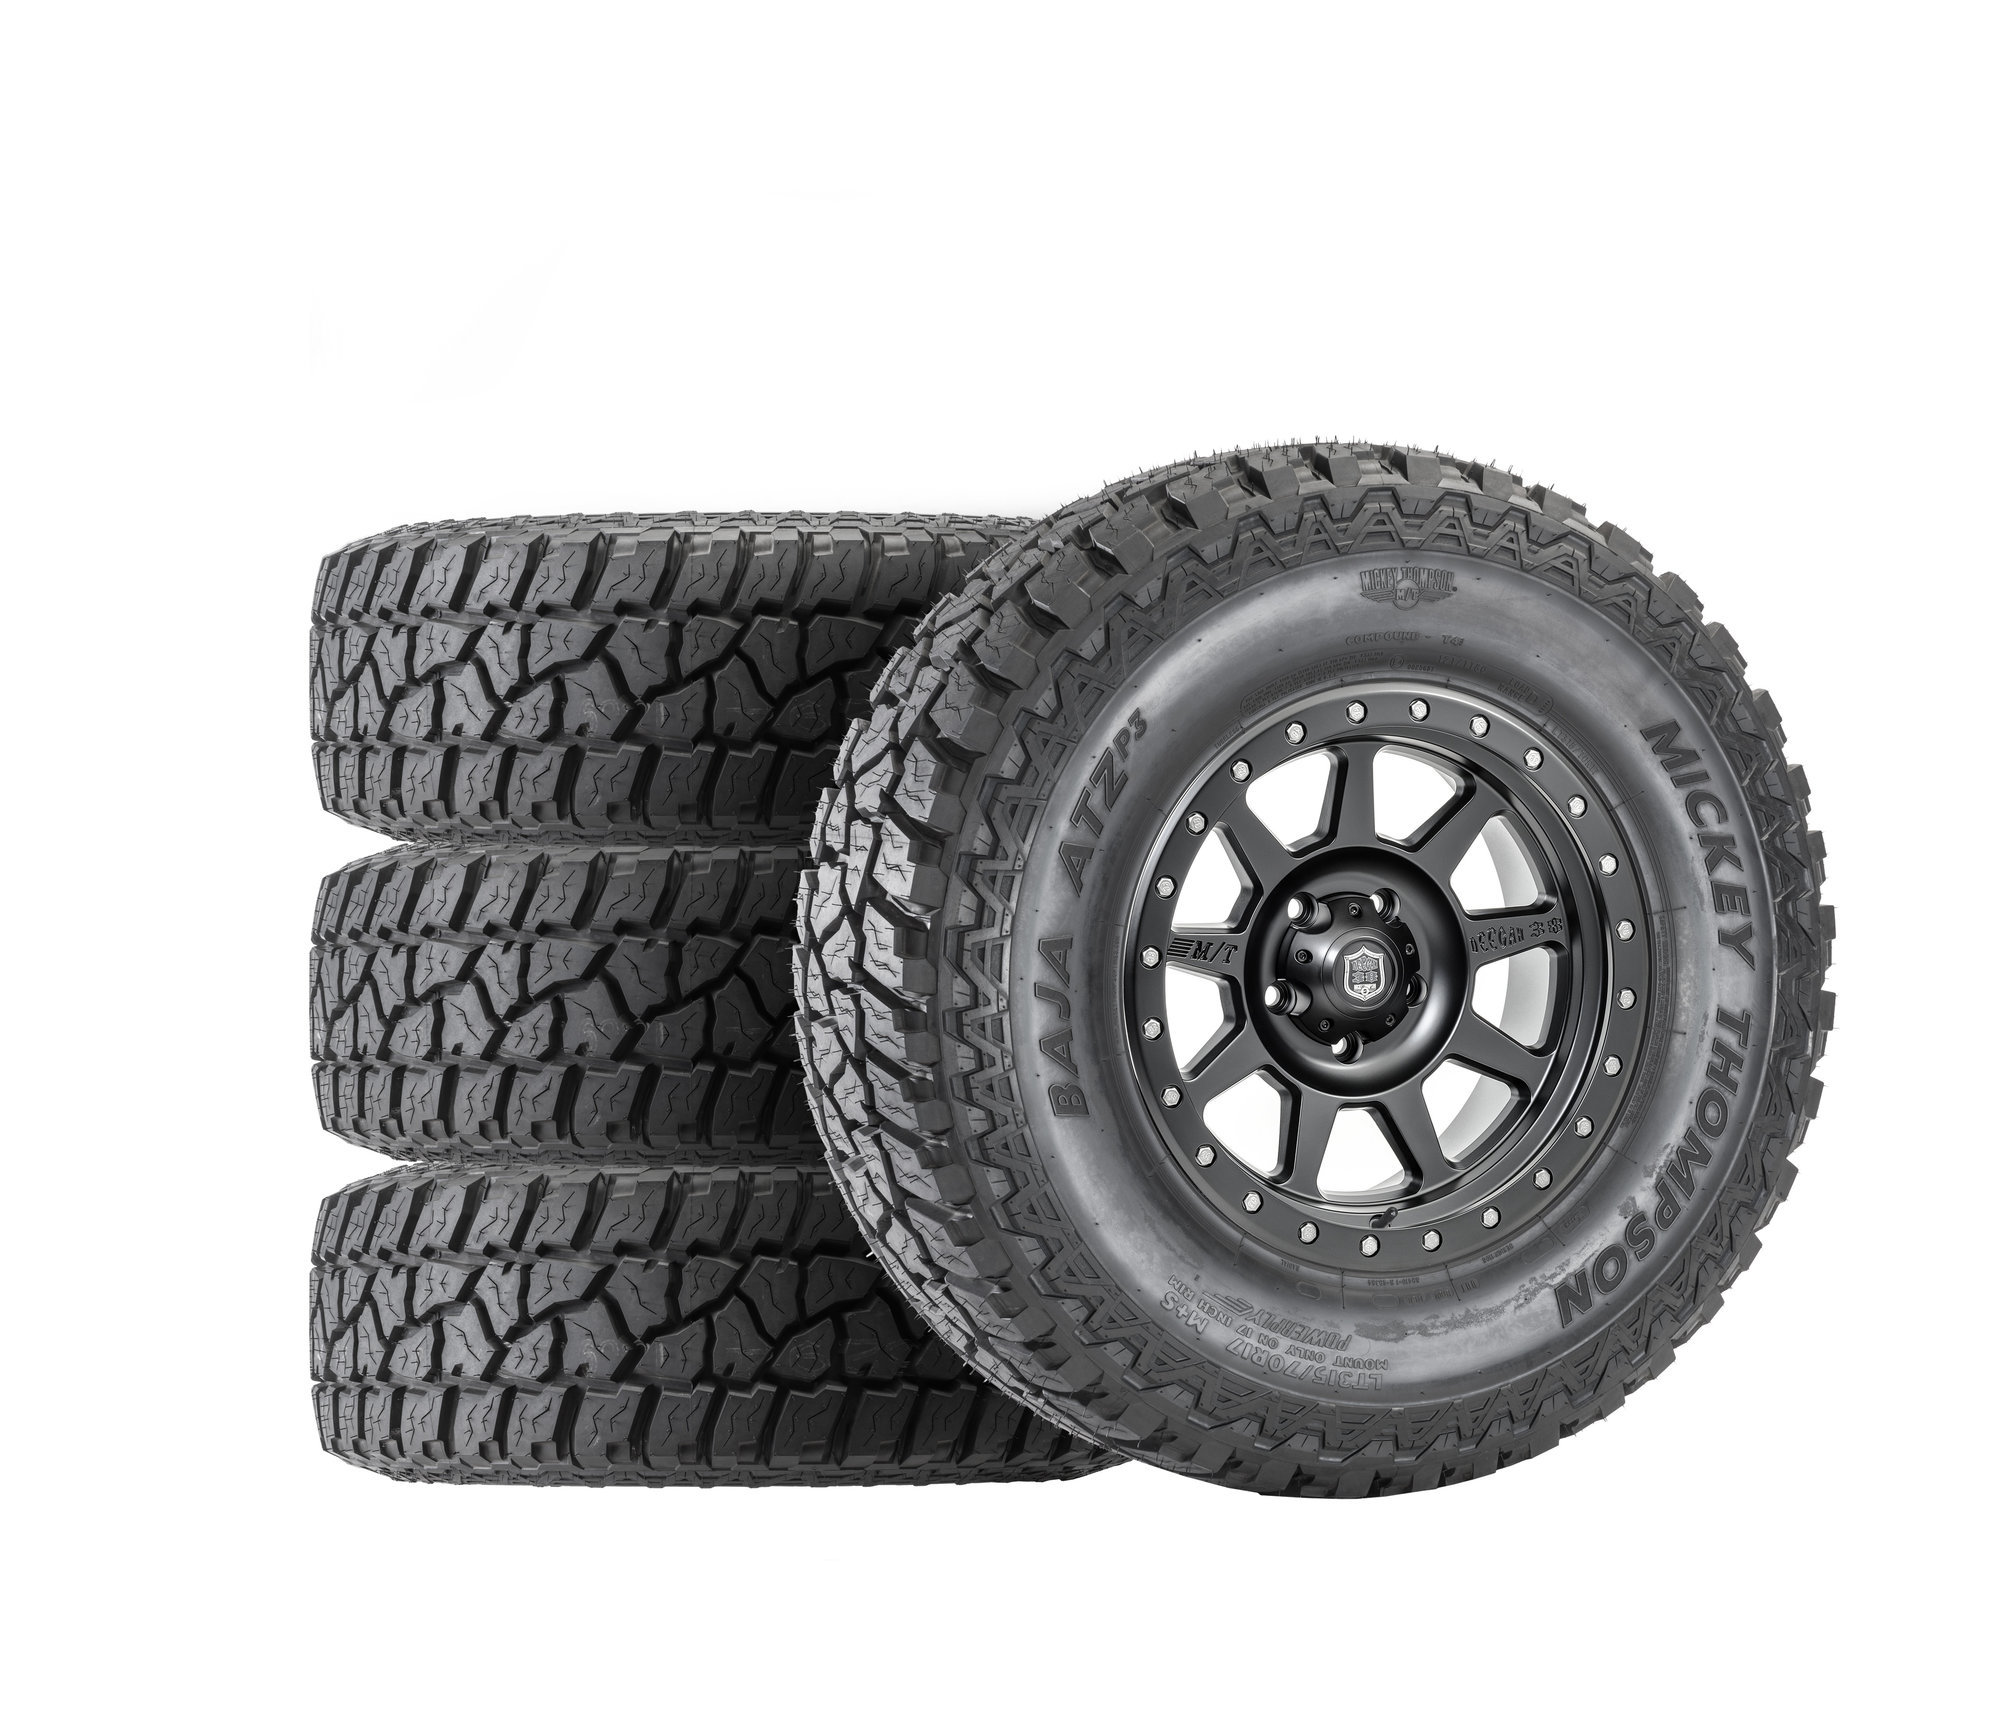 Mickey Thompson Deegan Pro 4 Wheel & Tire Package with Mickey Thompson.